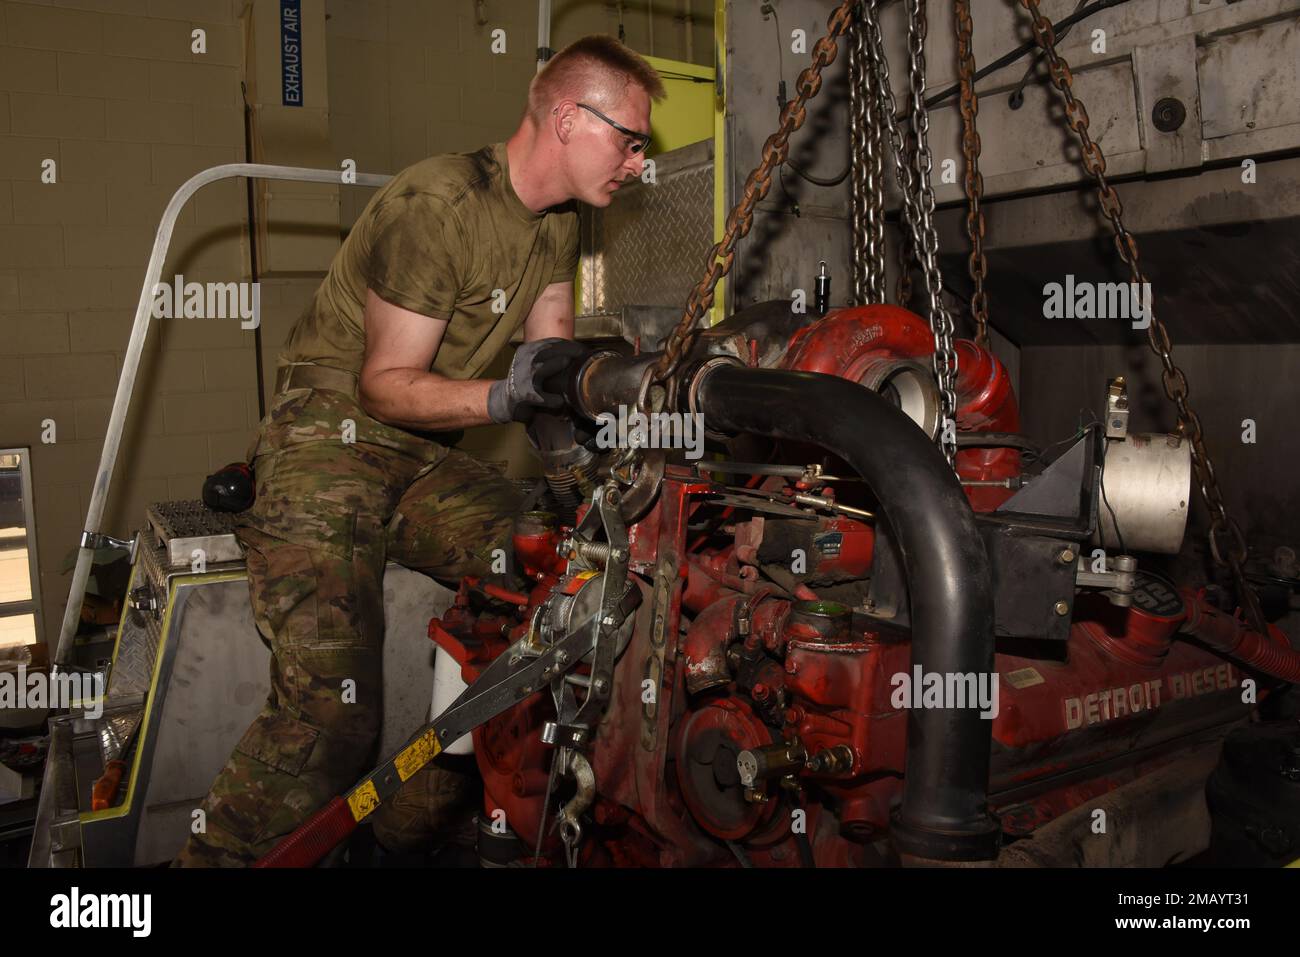 185th Air Refueling Wing vehicle mechanic Technical Sgt. Jason Lammers works to remove an 8 cylinder Detroit Diesel engine from the rear of a 1996 Teledyne P23 “Crash Truck” at the 185th Air Refueling Wing vehicle maintenance shop in Sioux City, Iowa on June 8, 2022. 185th ARW mechanics are overhauling the engine because it had developed an internal coolant leak.    U.S. Air National Guard photo Senior Master Sgt. Vincent De Groot Stock Photo